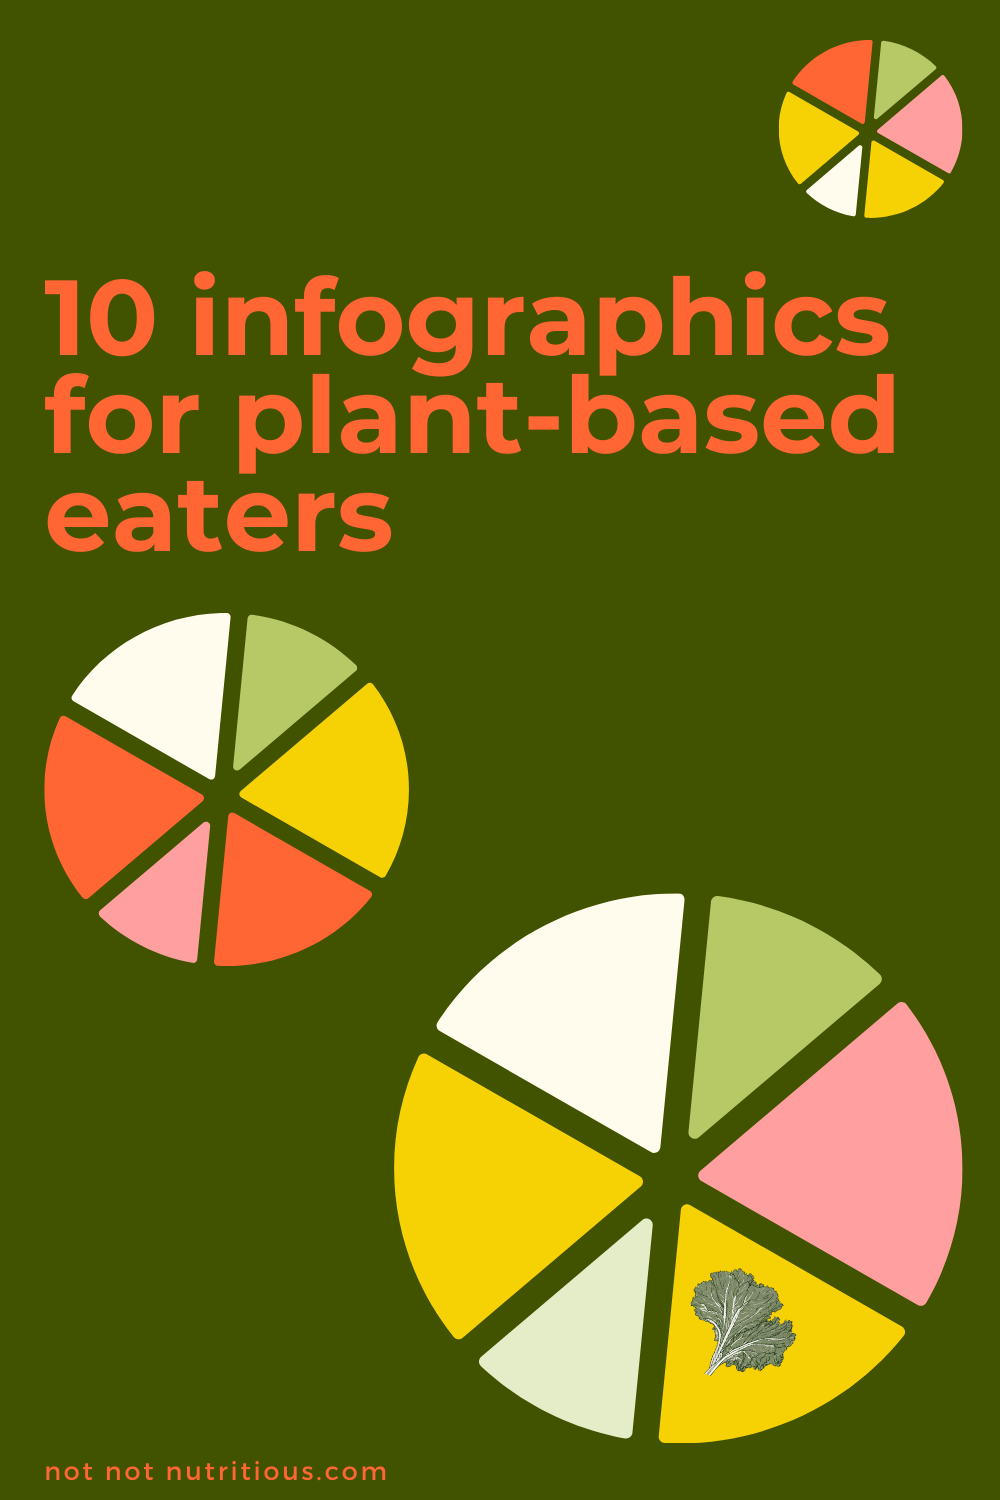 Cover image of 10 infographics for plant-based eaters